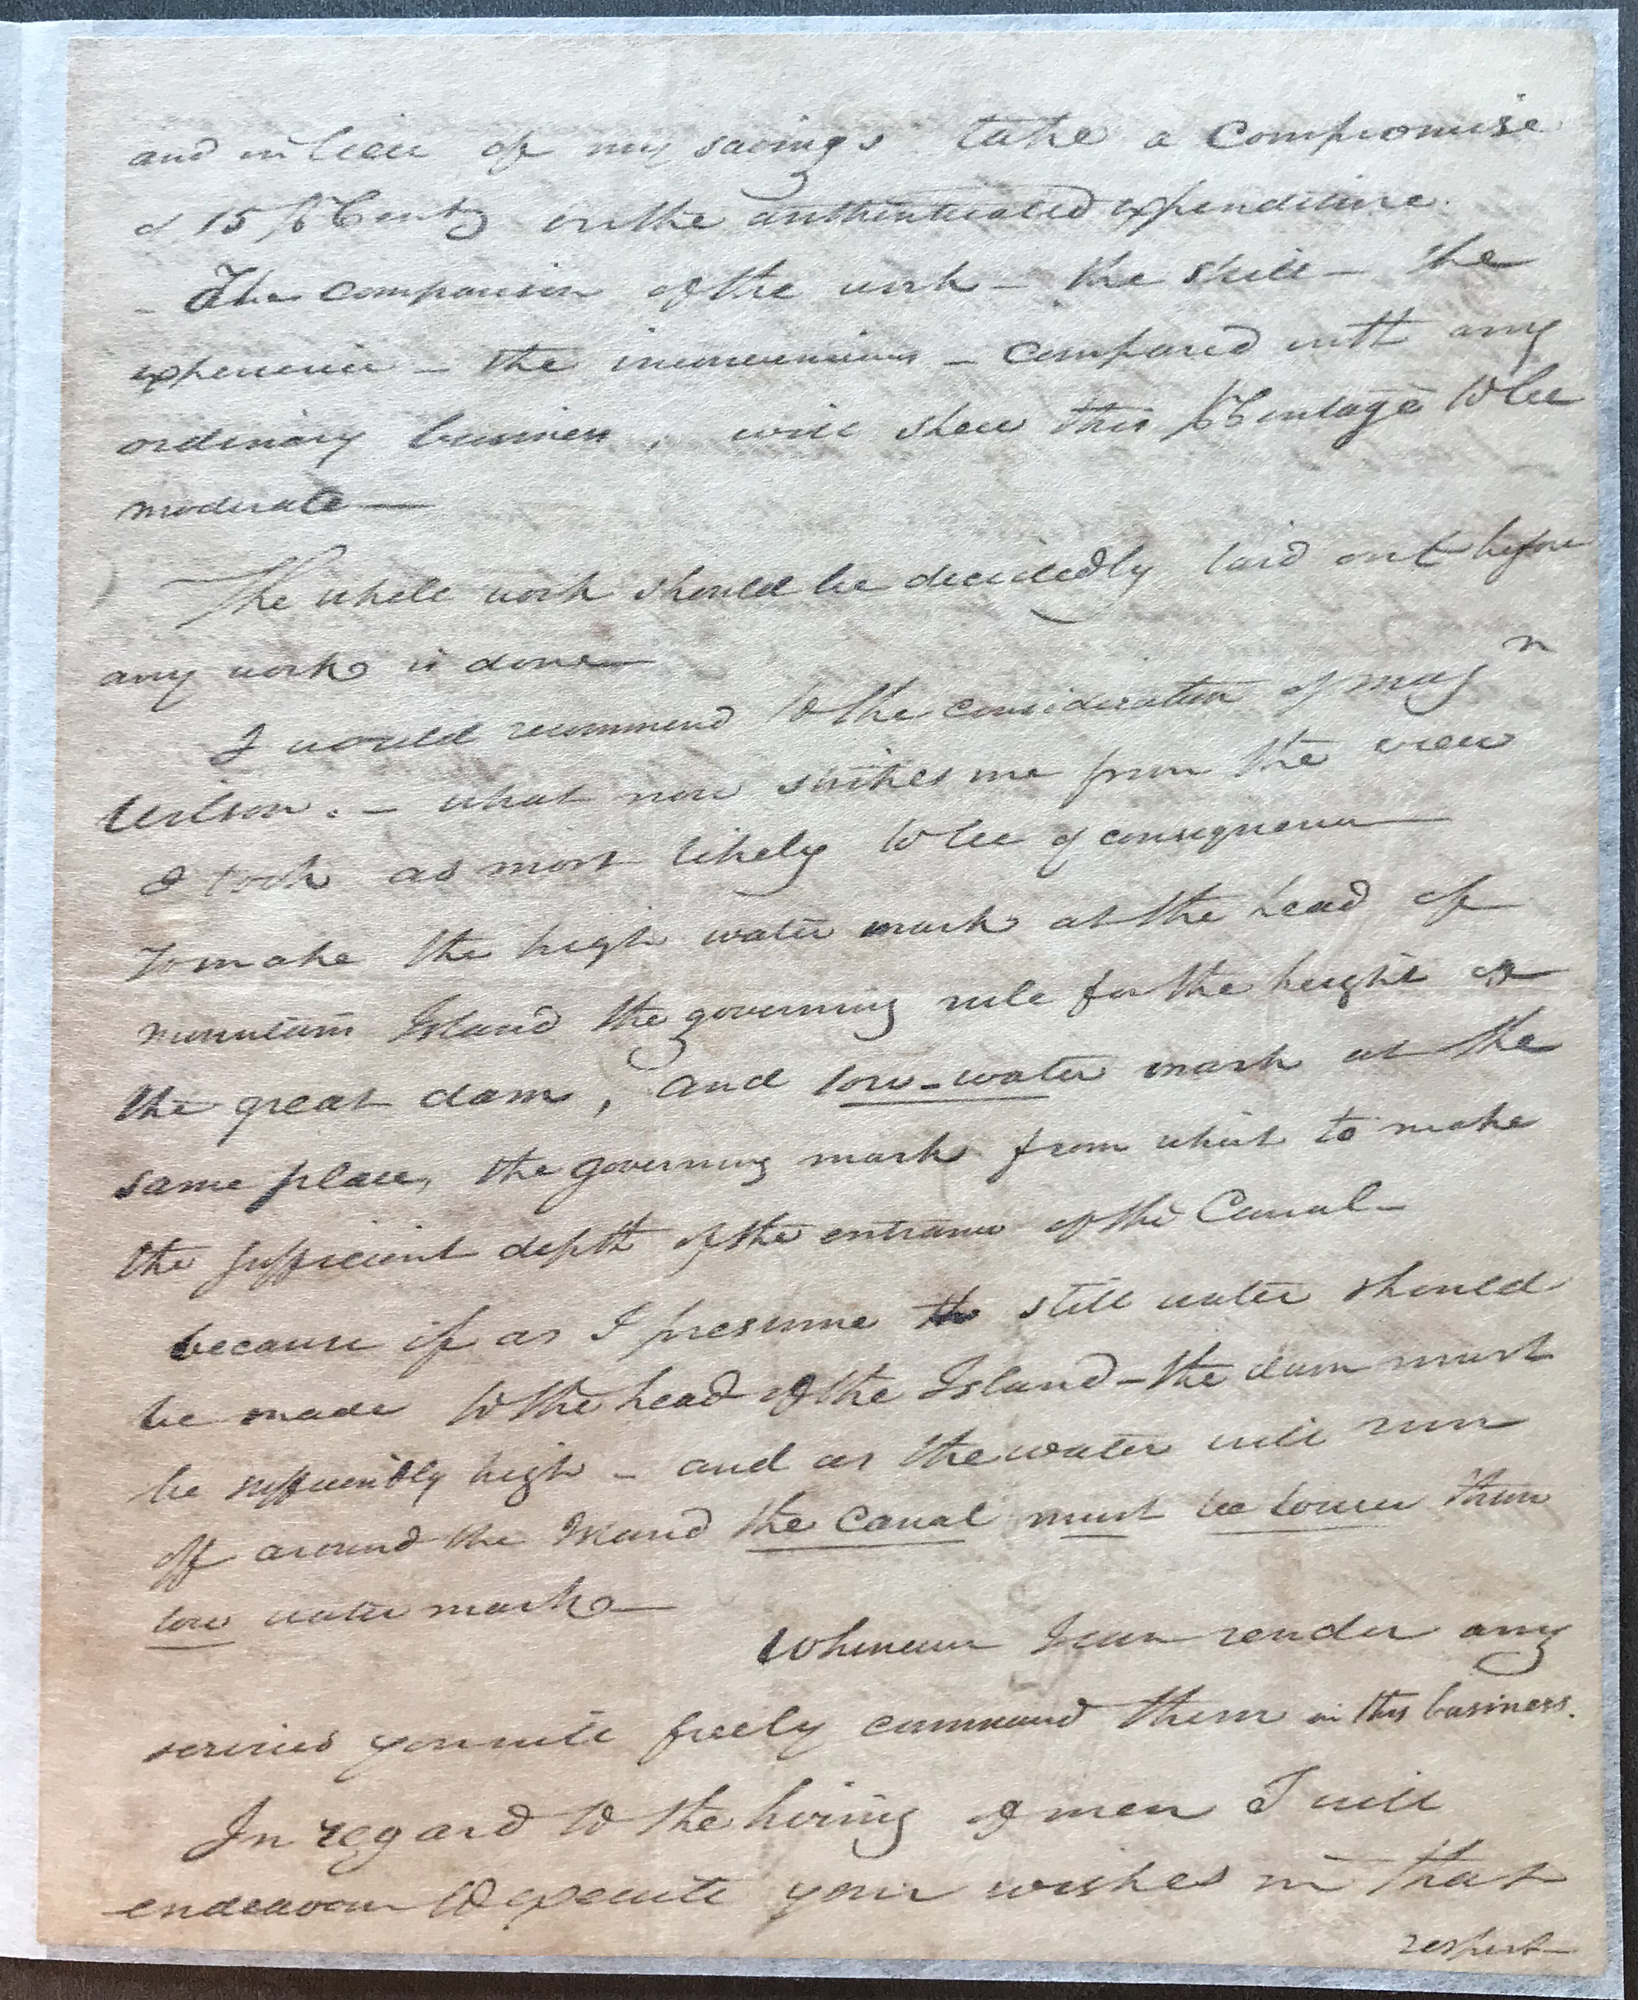 CONTRACT FOR CONSTRUCTION - 1820, p. 3